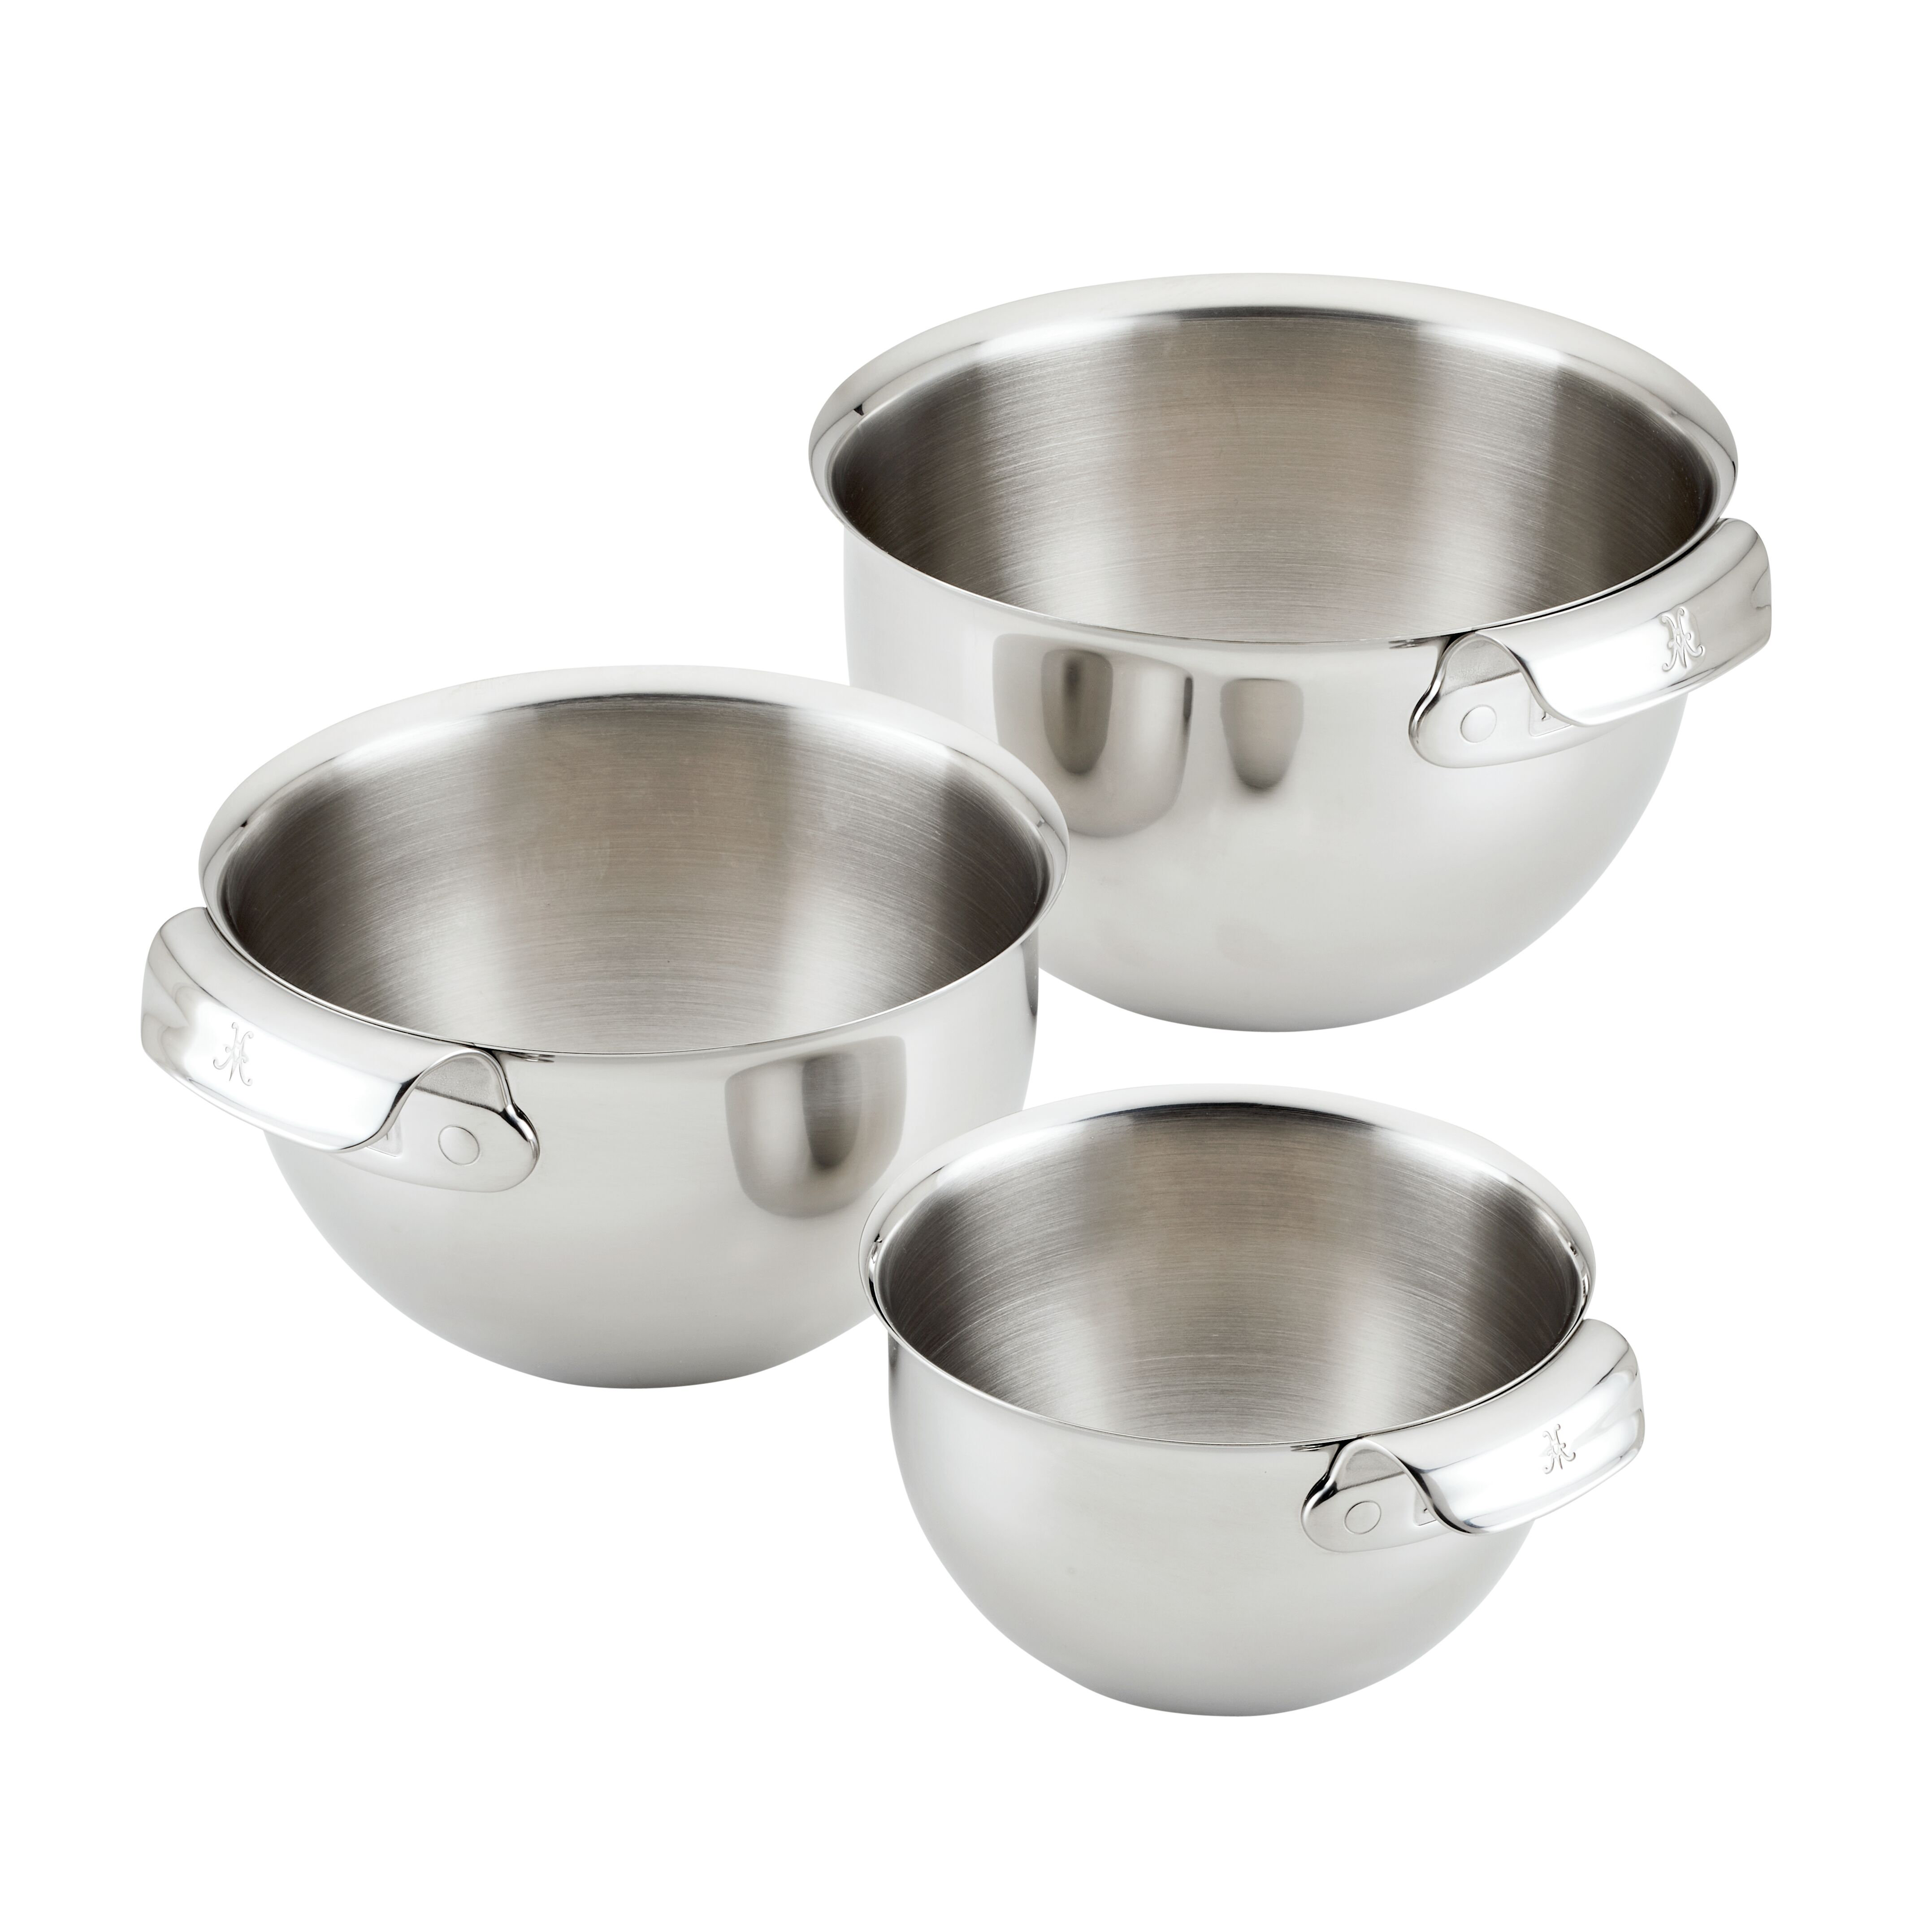 Tramontina 14pc Covered Mixing Bowl Set 18/8 Stainless Steel - New